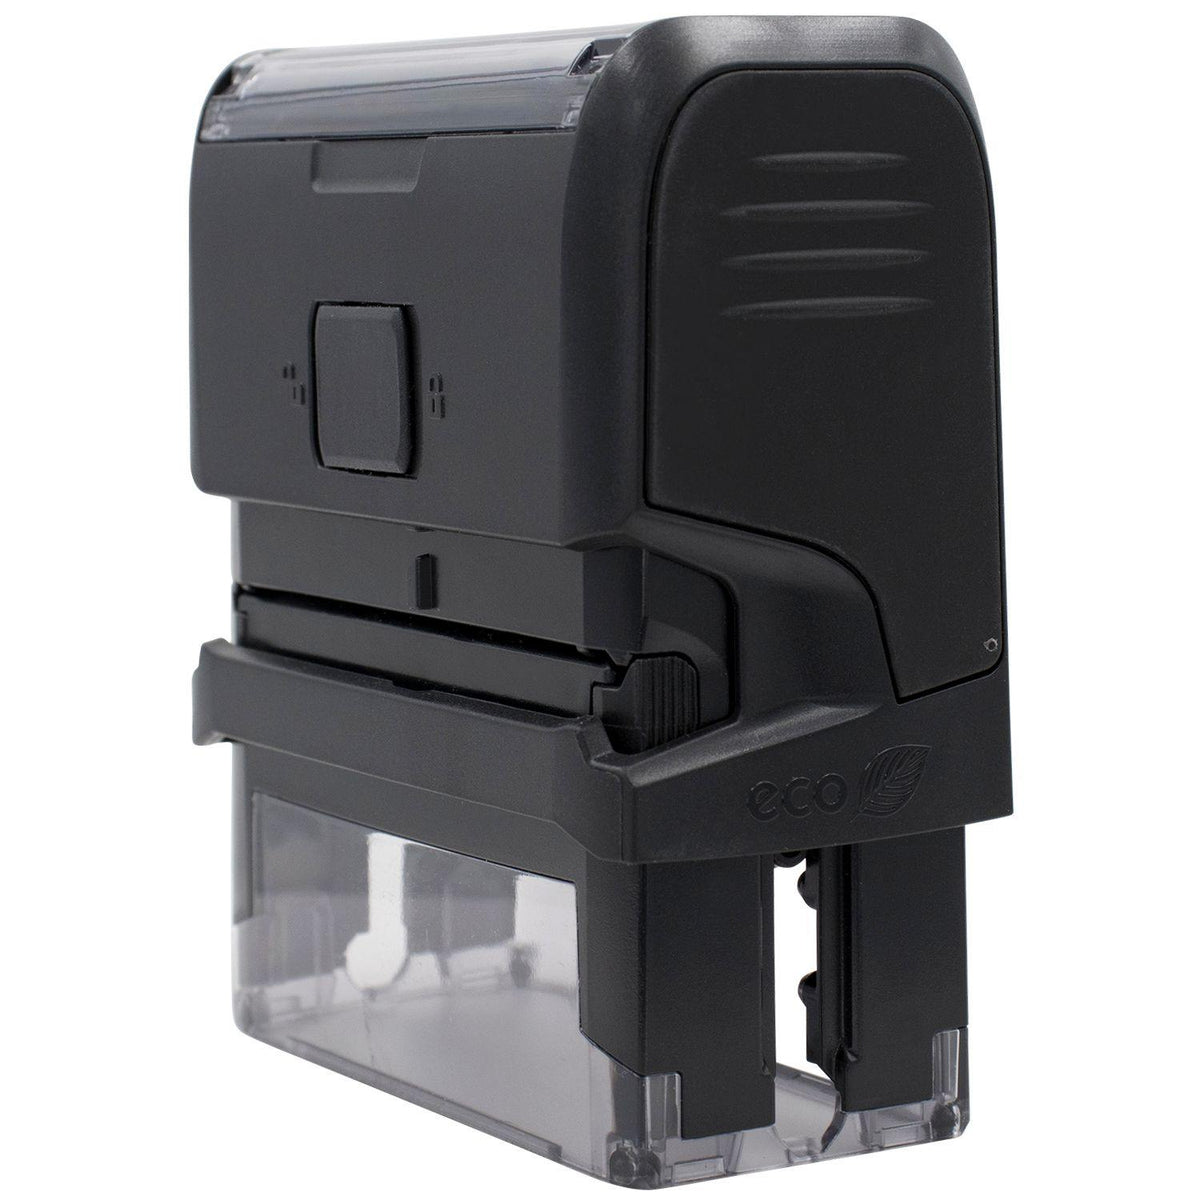 Large Self-Inking Restricted Delivery Stamp - Engineer Seal Stamps - Brand_Trodat, Impression Size_Large, Stamp Type_Self-Inking Stamp, Type of Use_Postal &amp; Mailing, Type of Use_Shipping &amp; Receiving